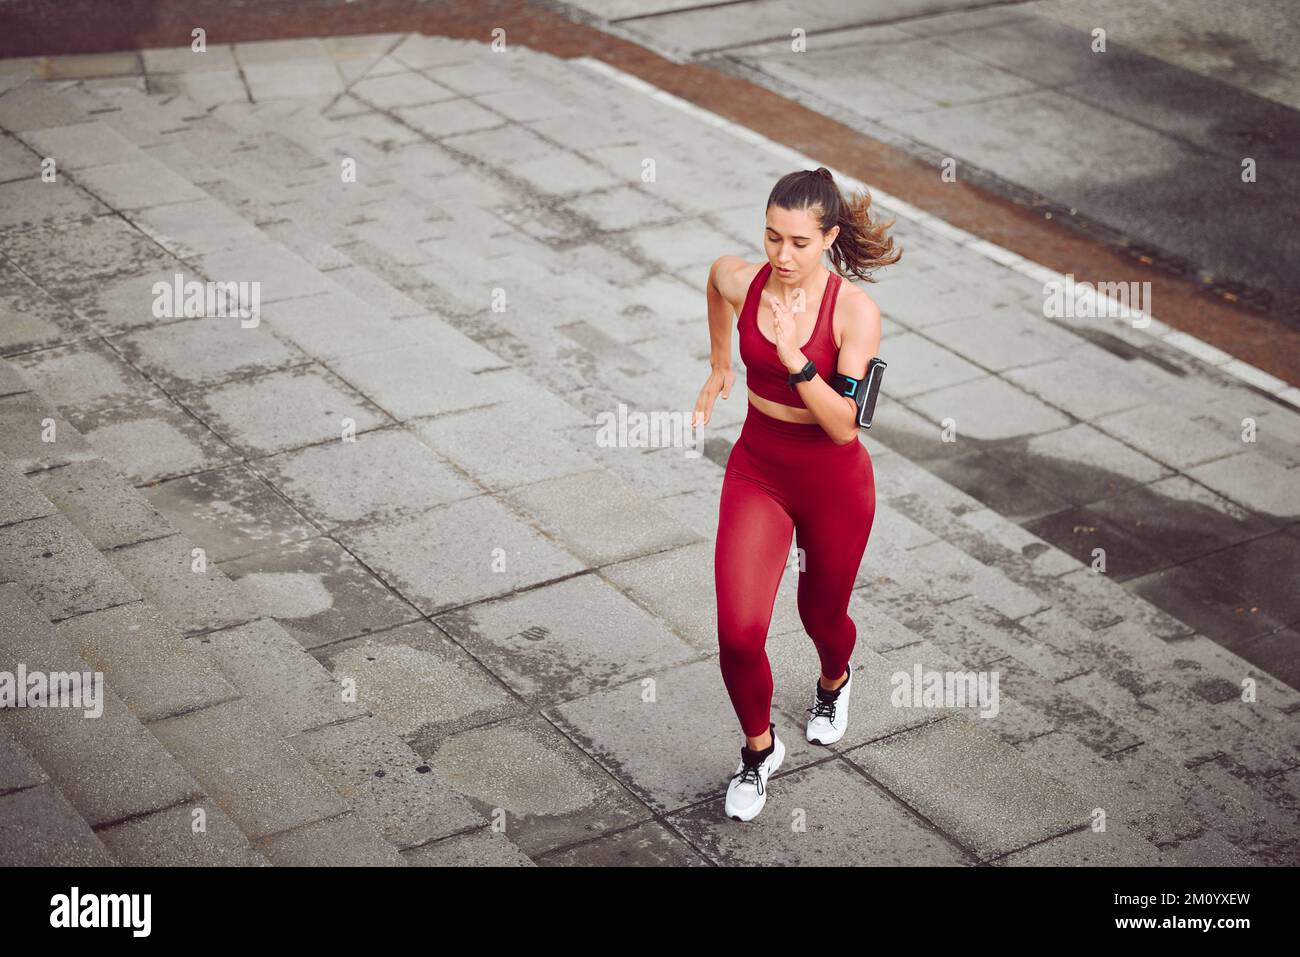 Going hard. High angle shot of an attractive young female athlete running outdoors. Stock Photo